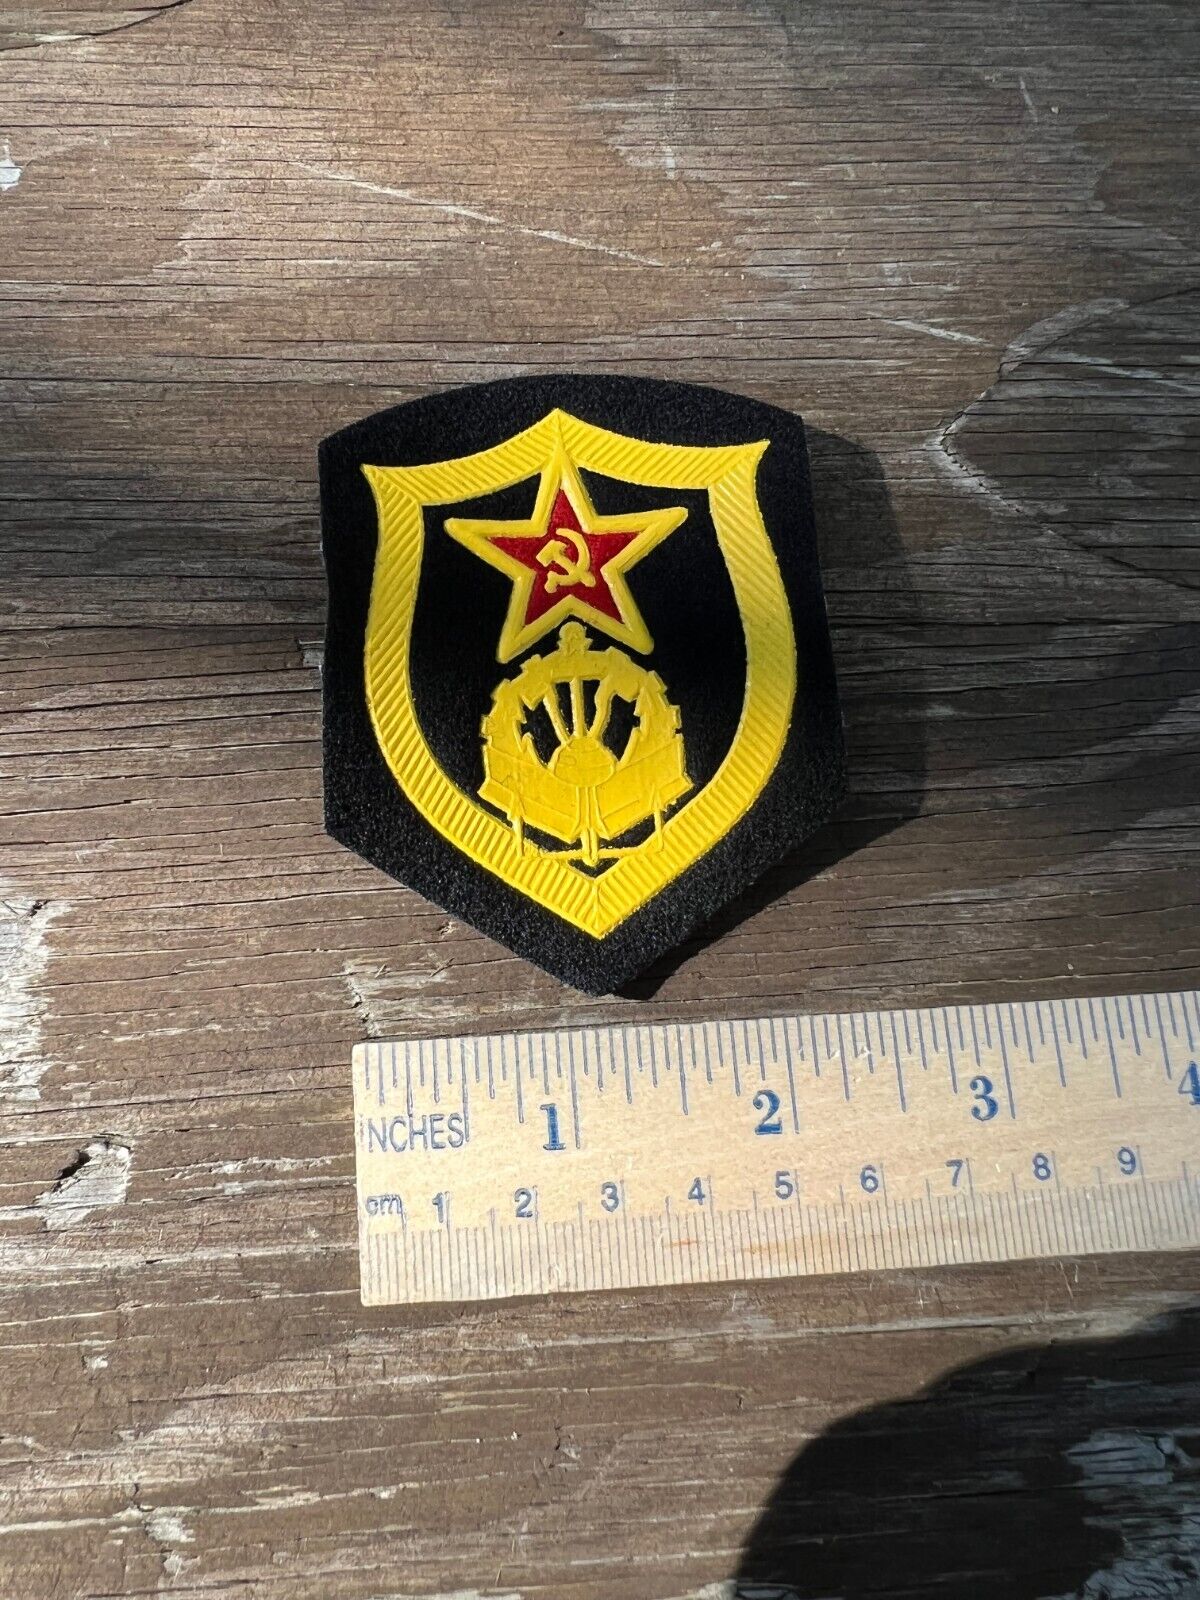 USSR KGB Soviet Russian Engineer Corps Patch Badge each